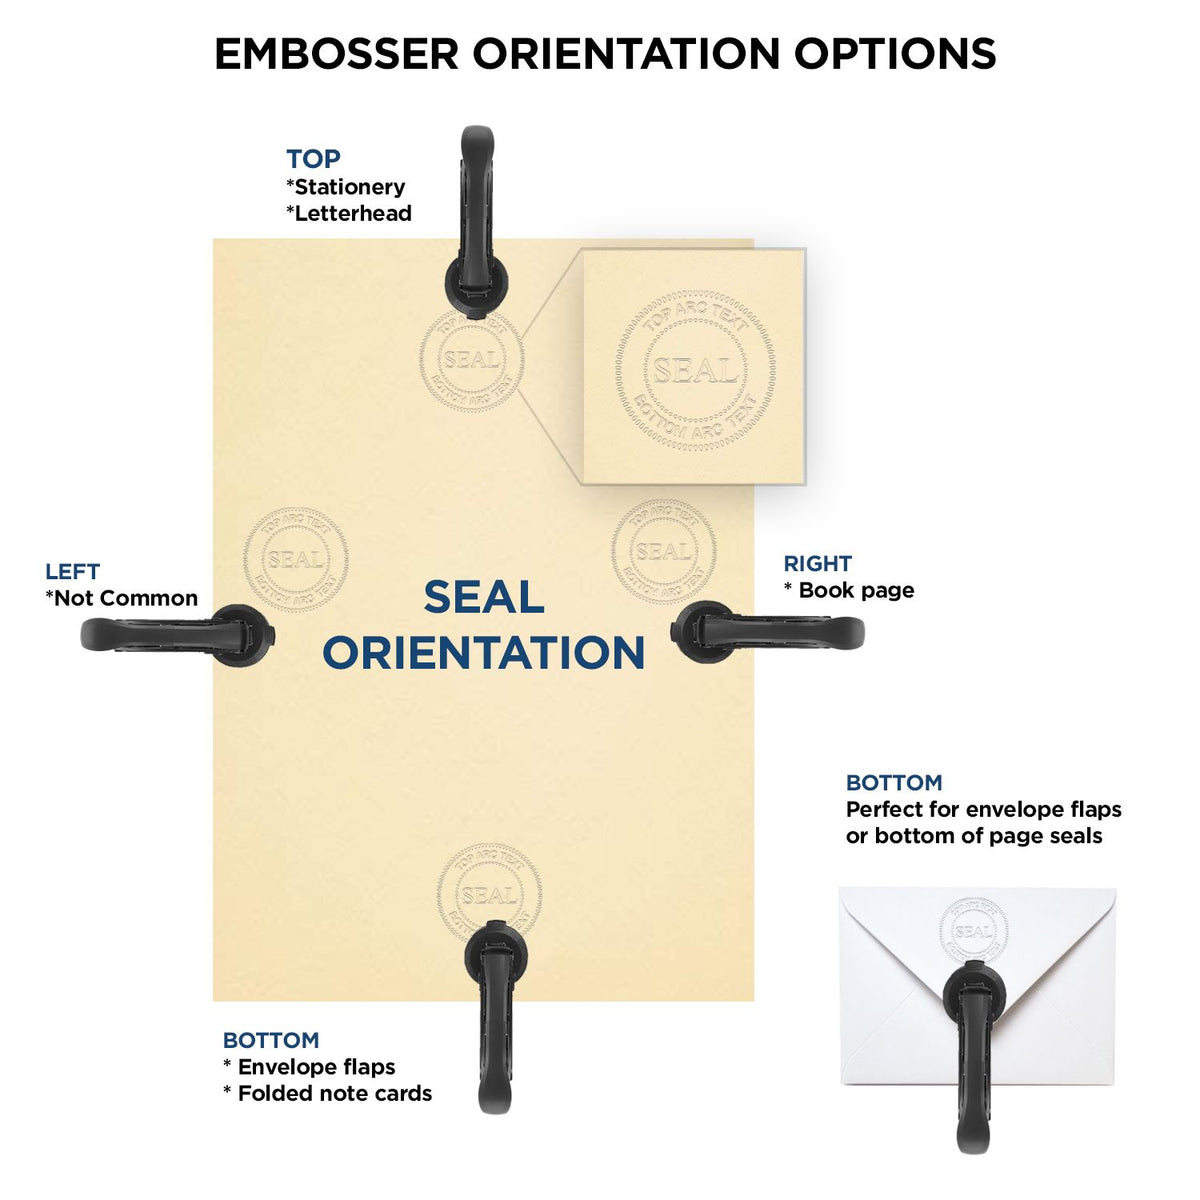 An infographic for the Hybrid Mississippi Land Surveyor Seal showing embosser orientation, this is showing examples of a top, bottom, right and left insert.